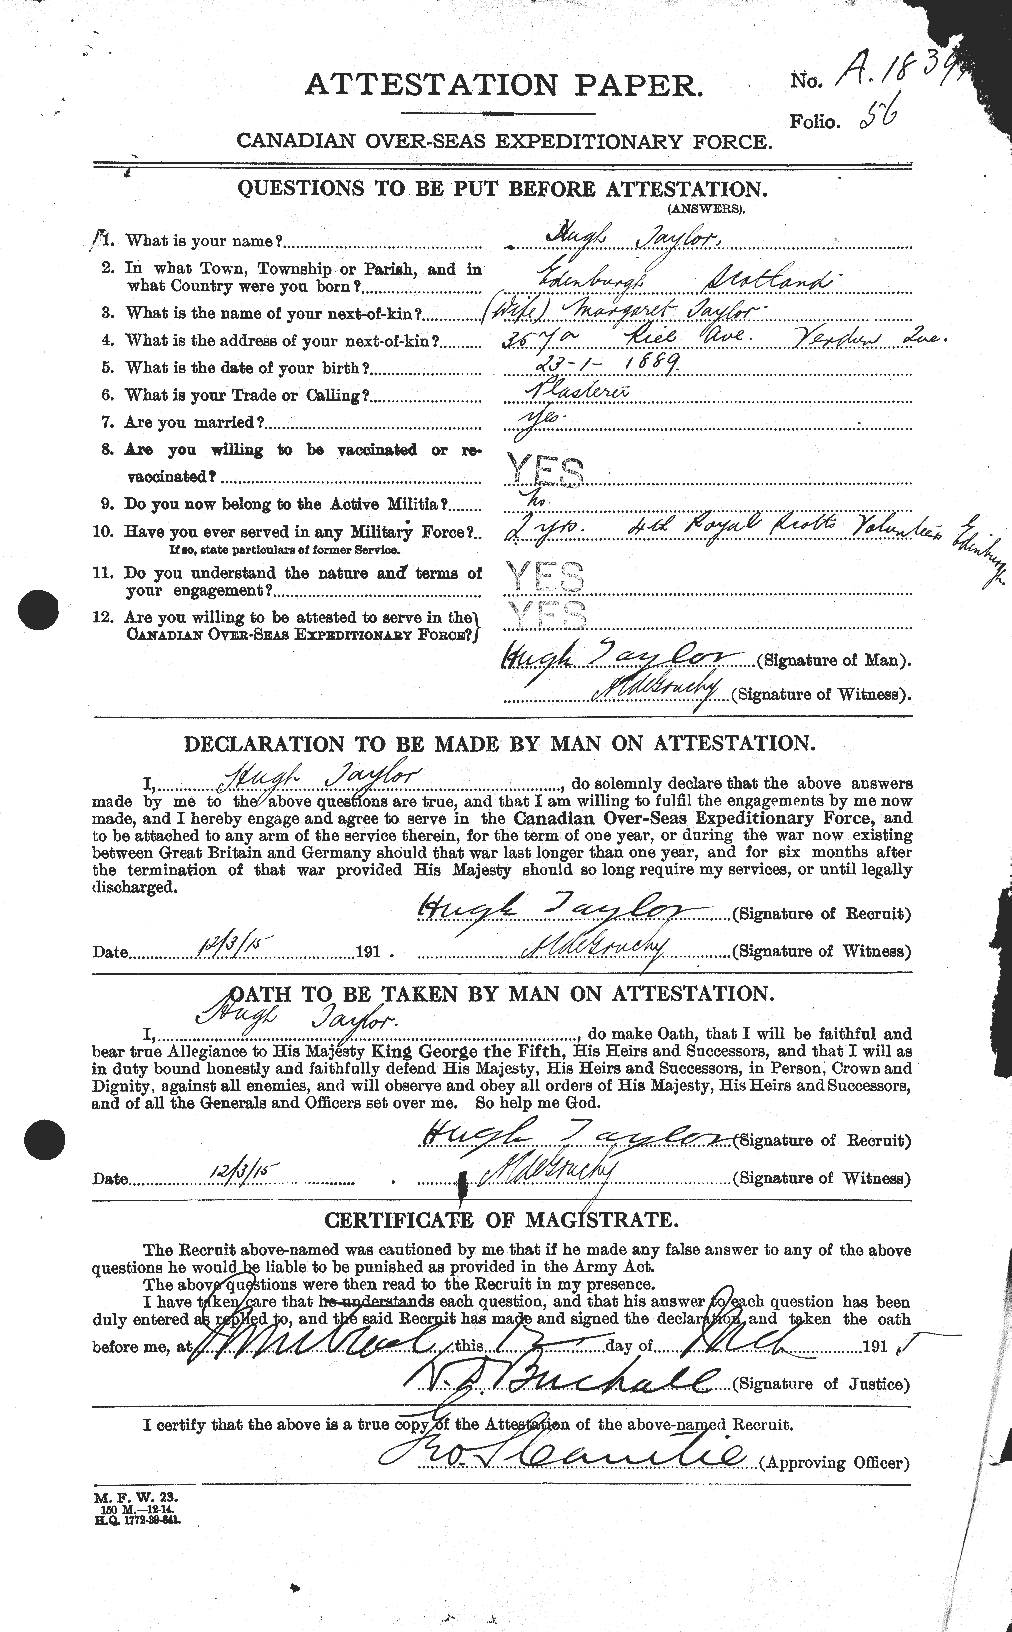 Personnel Records of the First World War - CEF 626611a